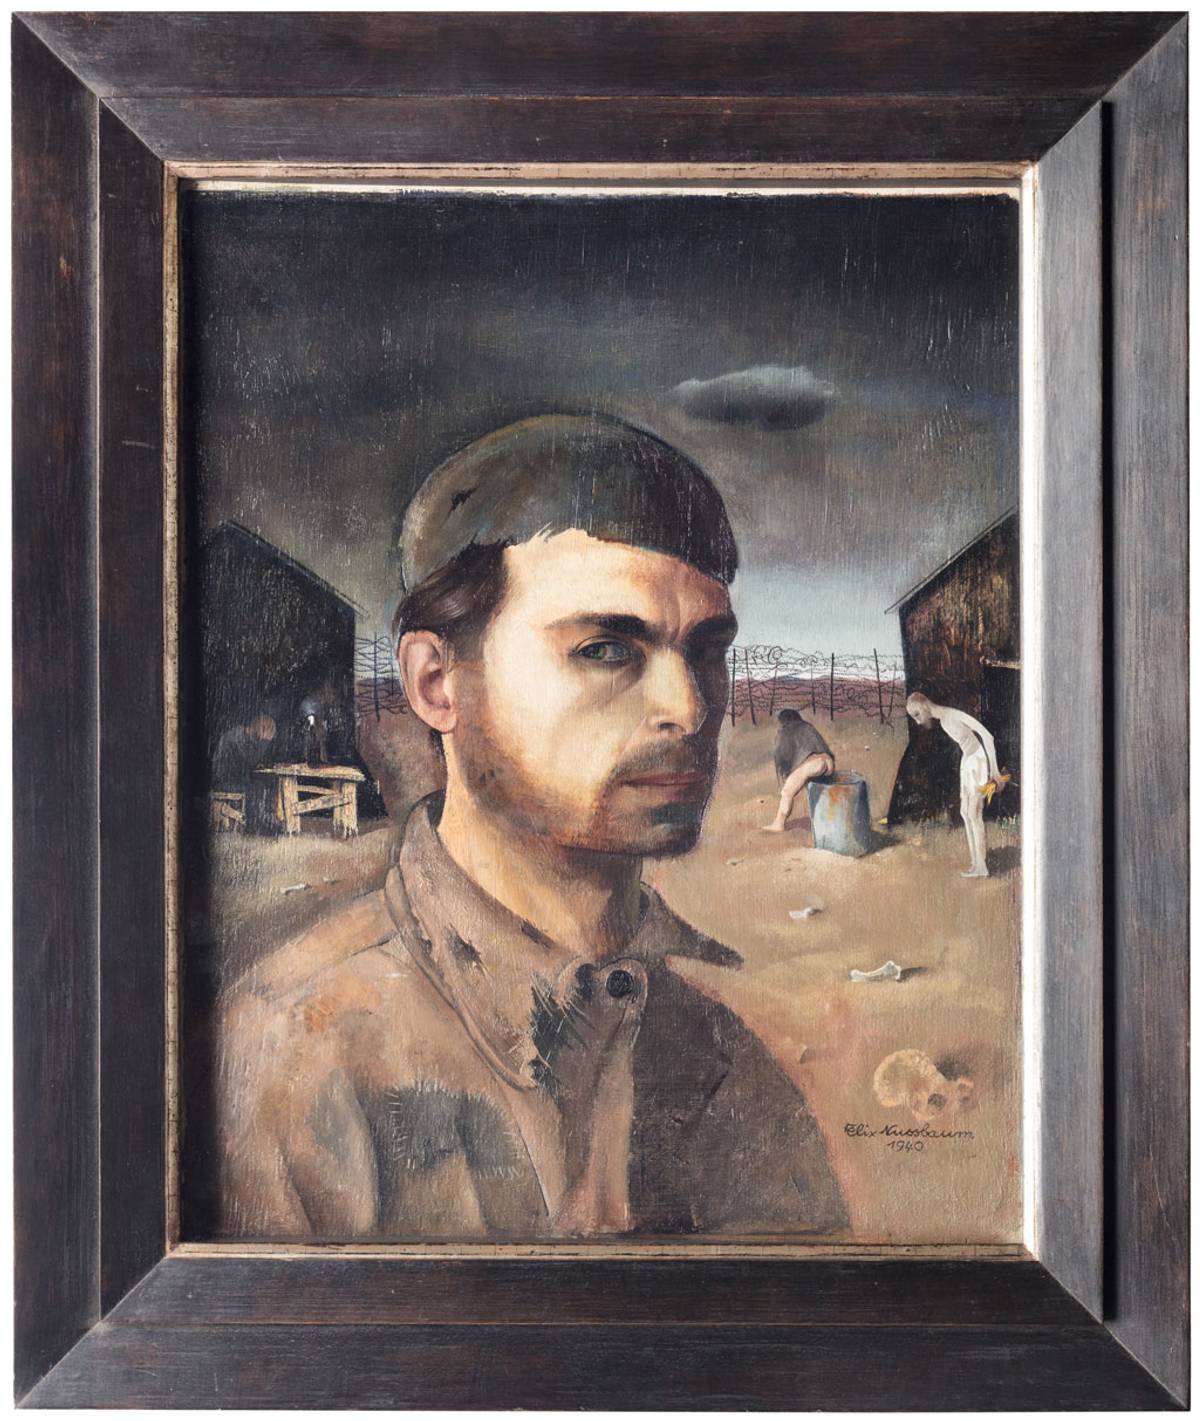 ‘Self-Portrait in the Camp,’ 1940, oil on panel (Photo: Hulya Kolabas for Neue Galerie New York © 2019 Artists Rights Society (ARS), New York)